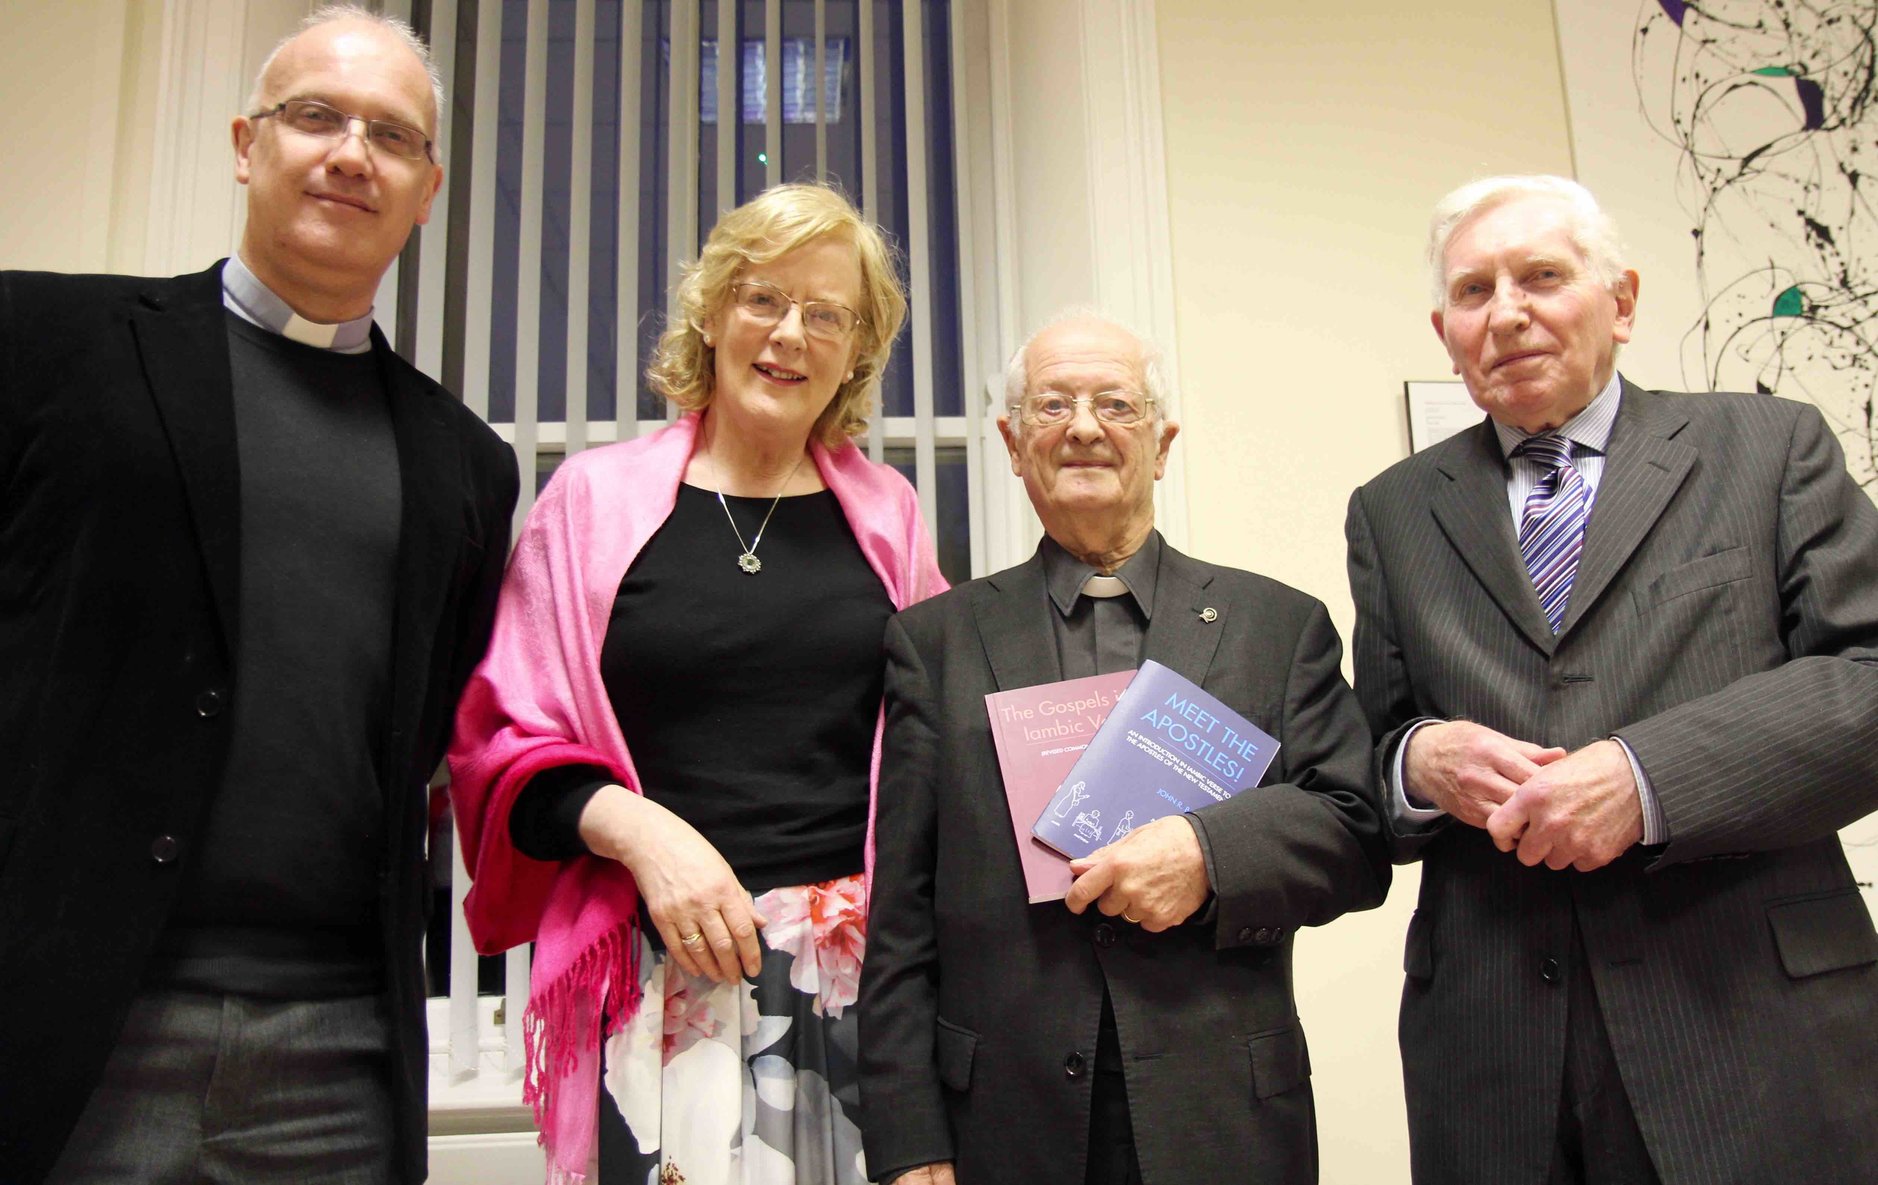 Canon Dr Maurice Elliott, Dr Margaret Daly–Denton, Canon Prof John Bartlett and Dr Kenneth Milne pictured at the launch of Canon Bartlett's books,  ‘Meet the Apostles' and ‘The Gospels in Iambic Verse', at the Church of Ireland Theological Institute in February 2020.